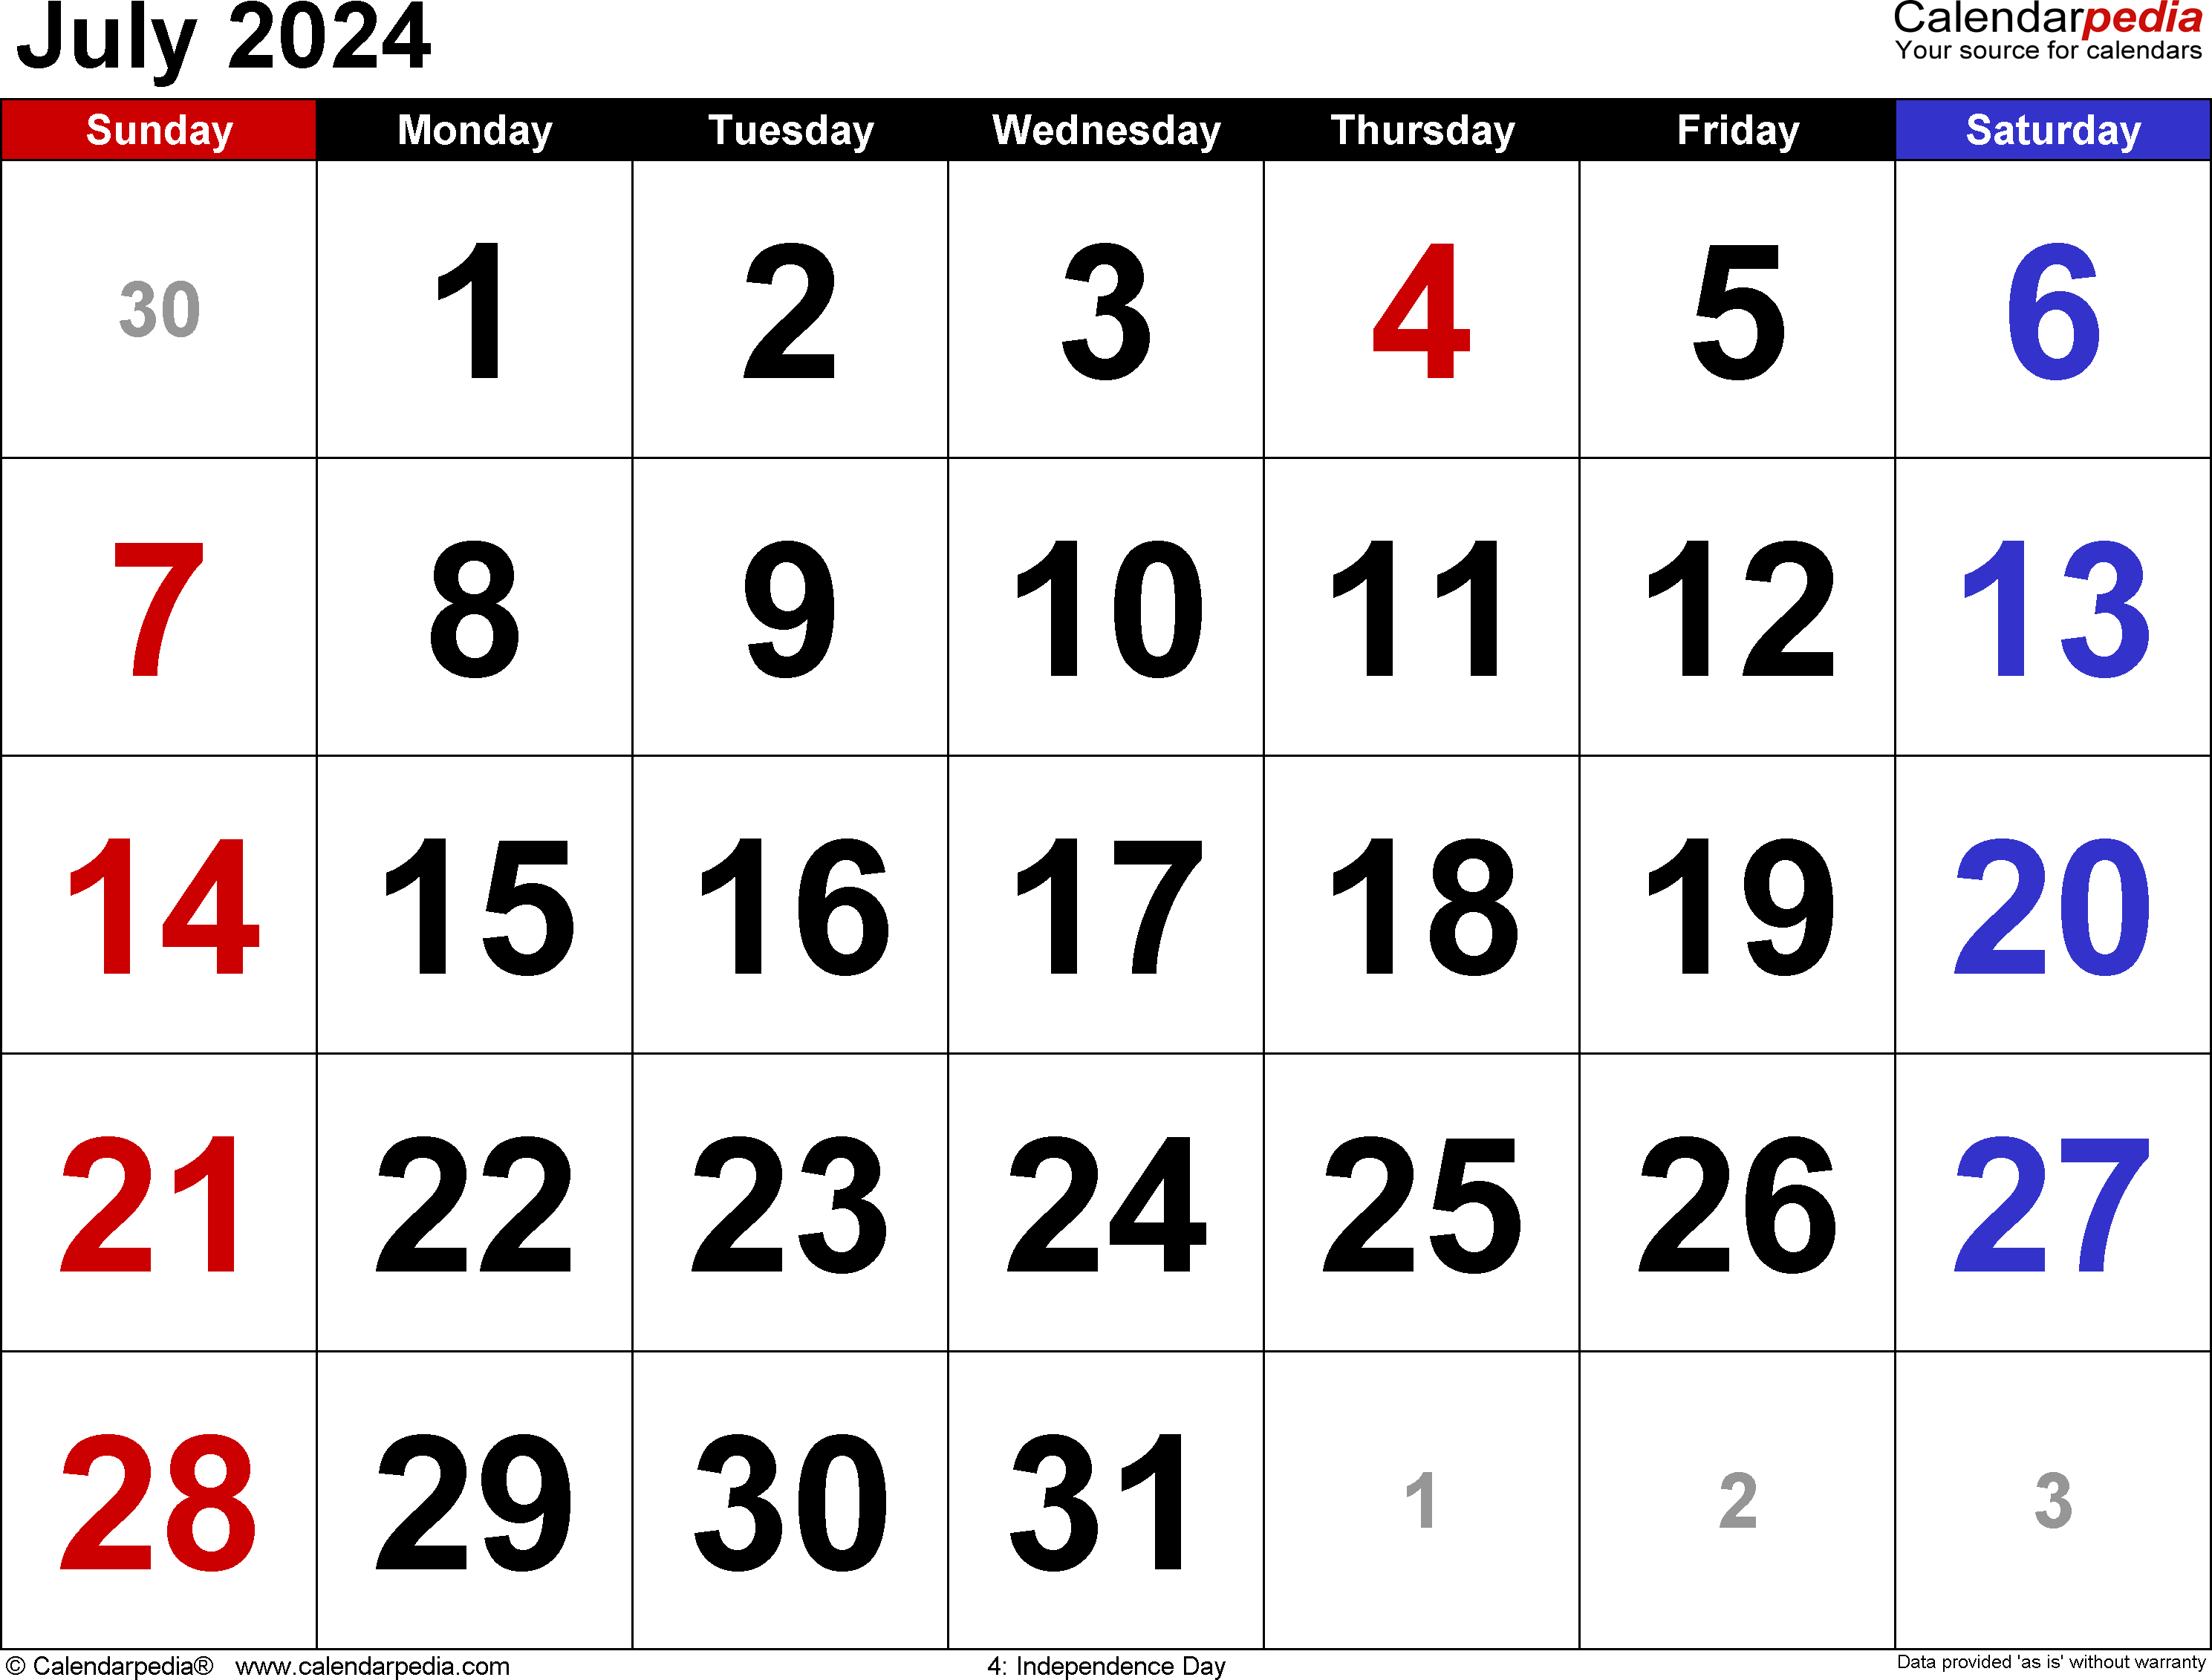 July 2024 Calendar | Templates For Word, Excel And Pdf throughout 7 Month Desk Calendar Starting July 2024